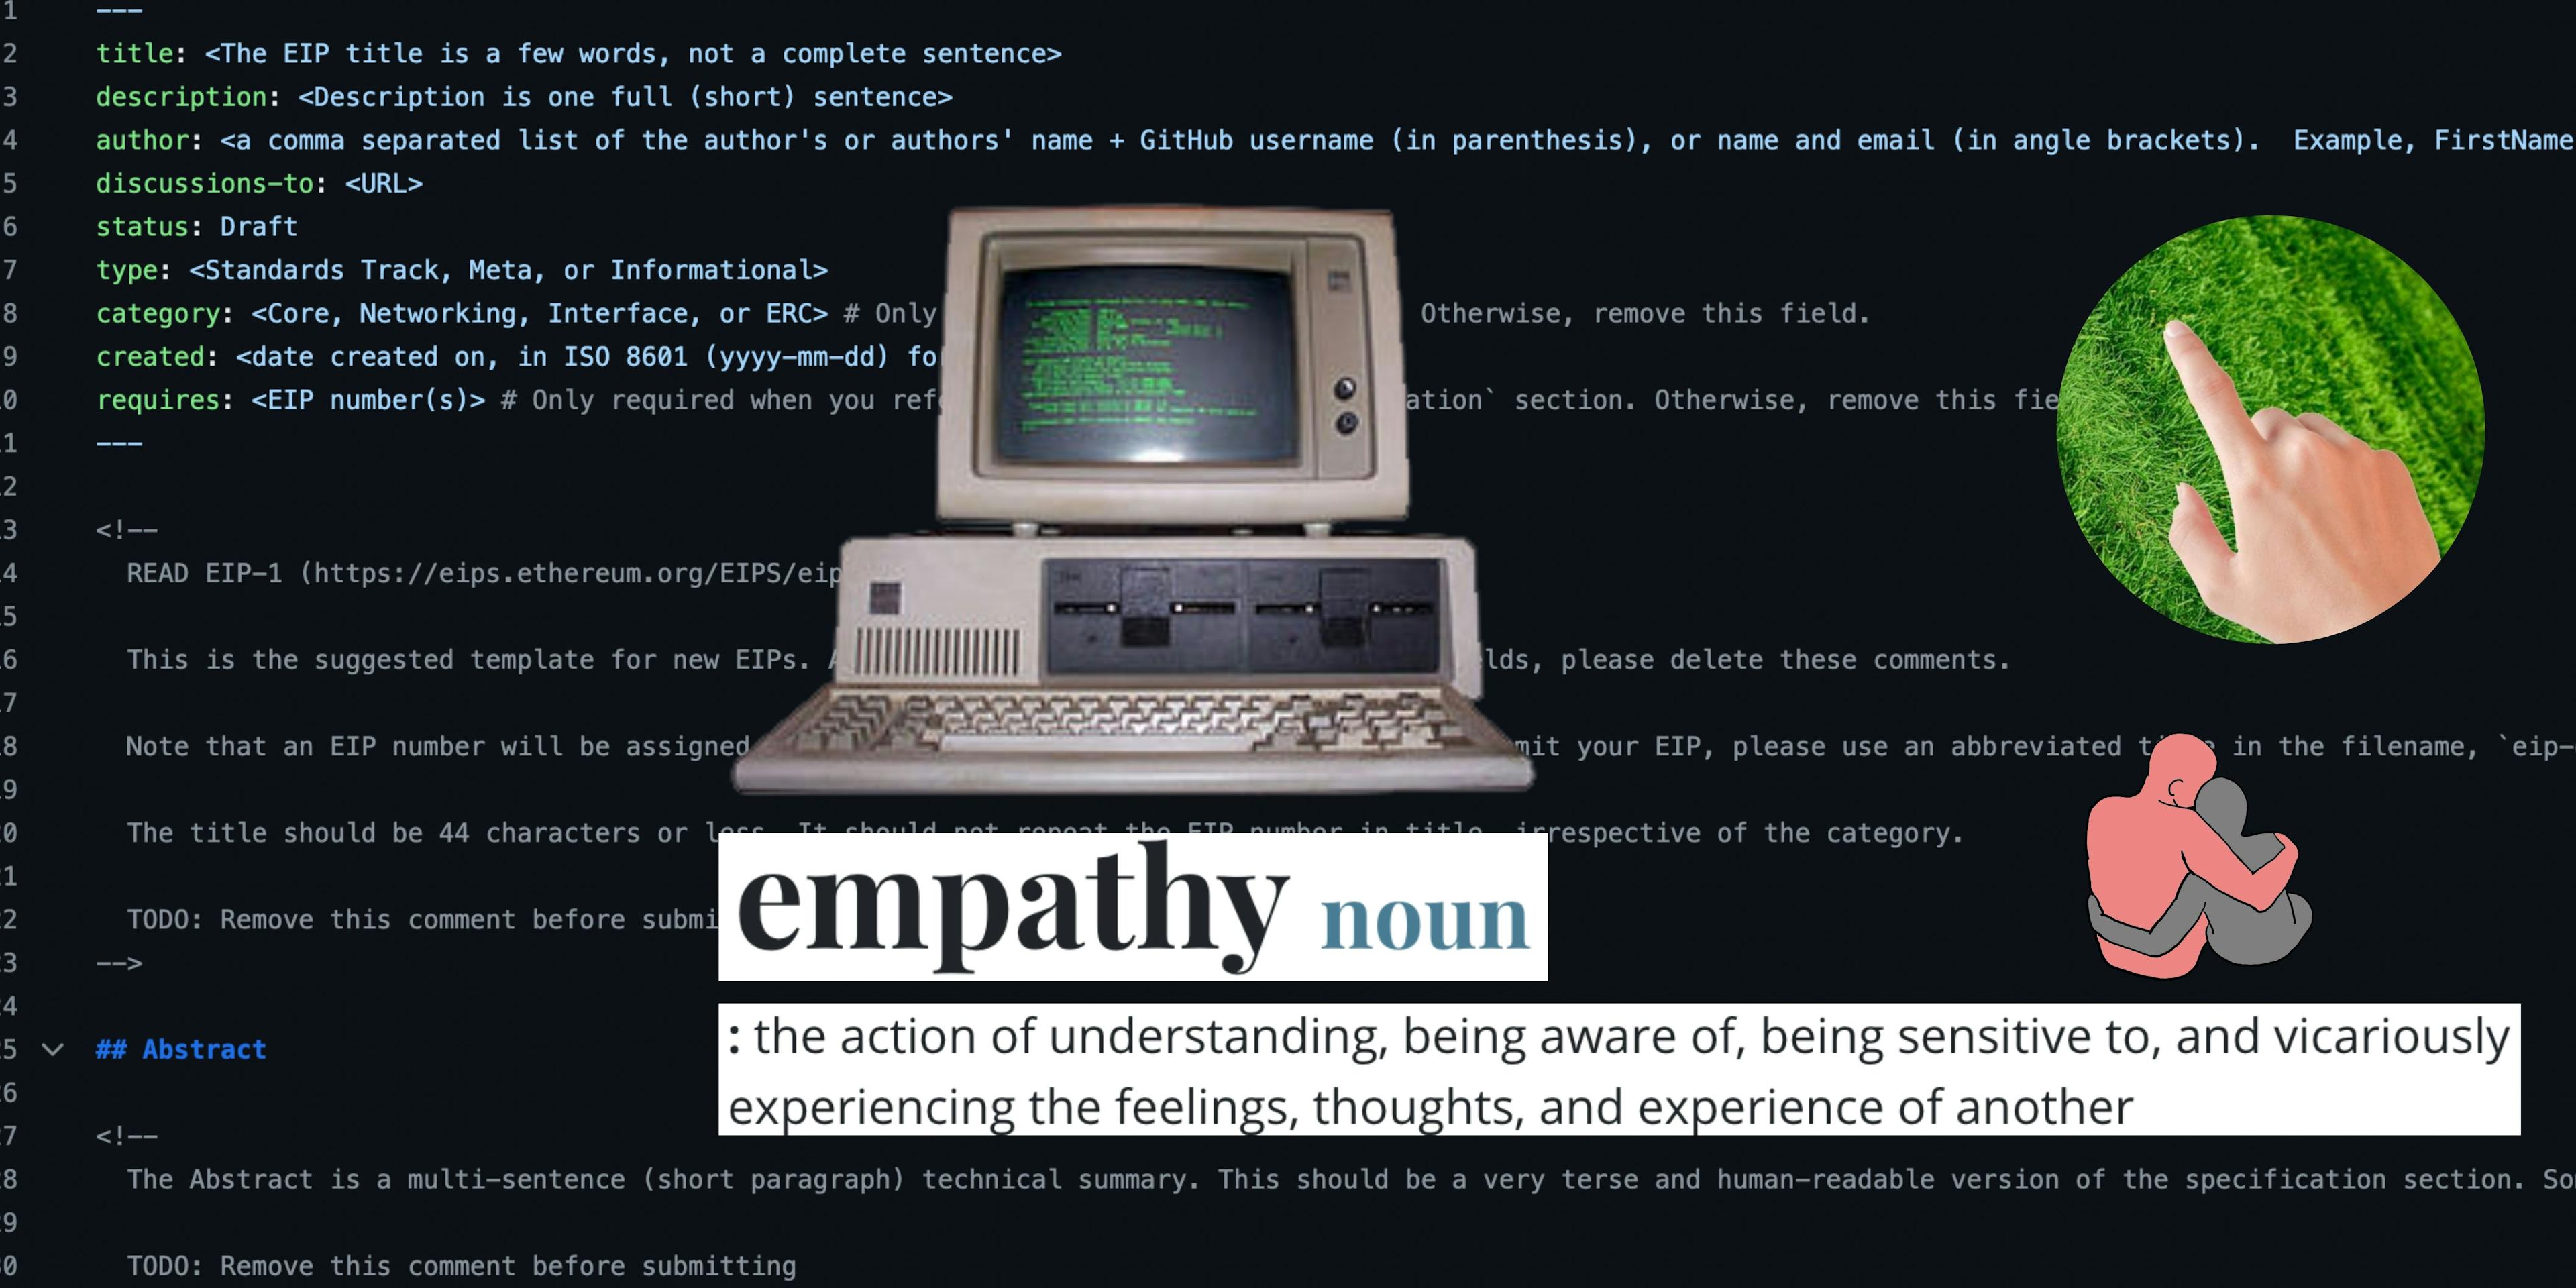 how do we code for empathy in the future?